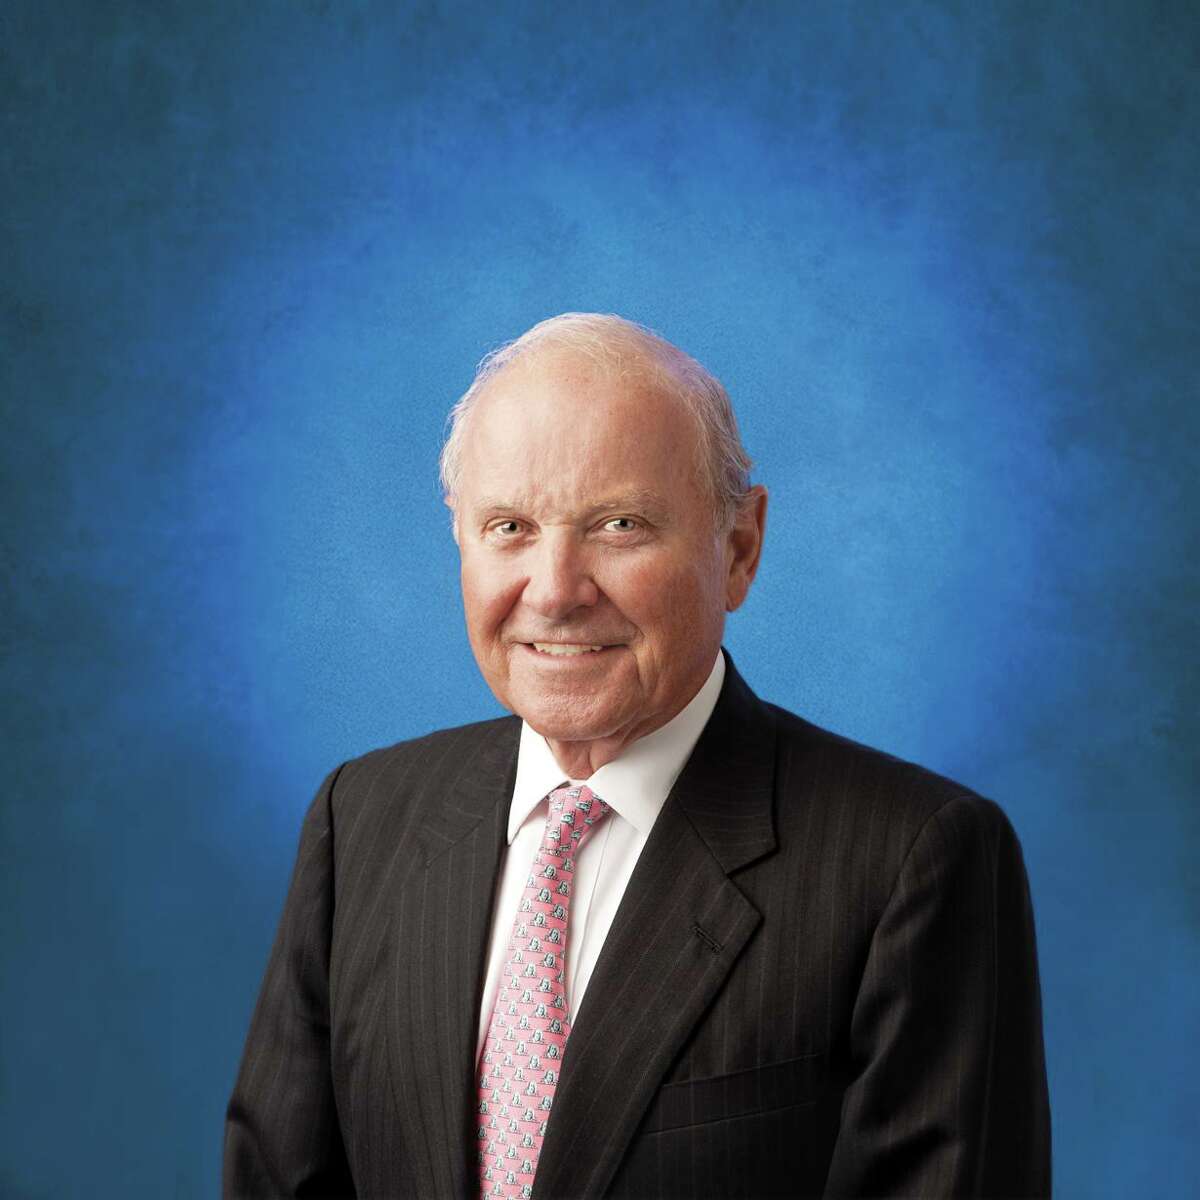 Charles Johnson, Chairman of the Board, Franklin Resources, San Mateo, CA